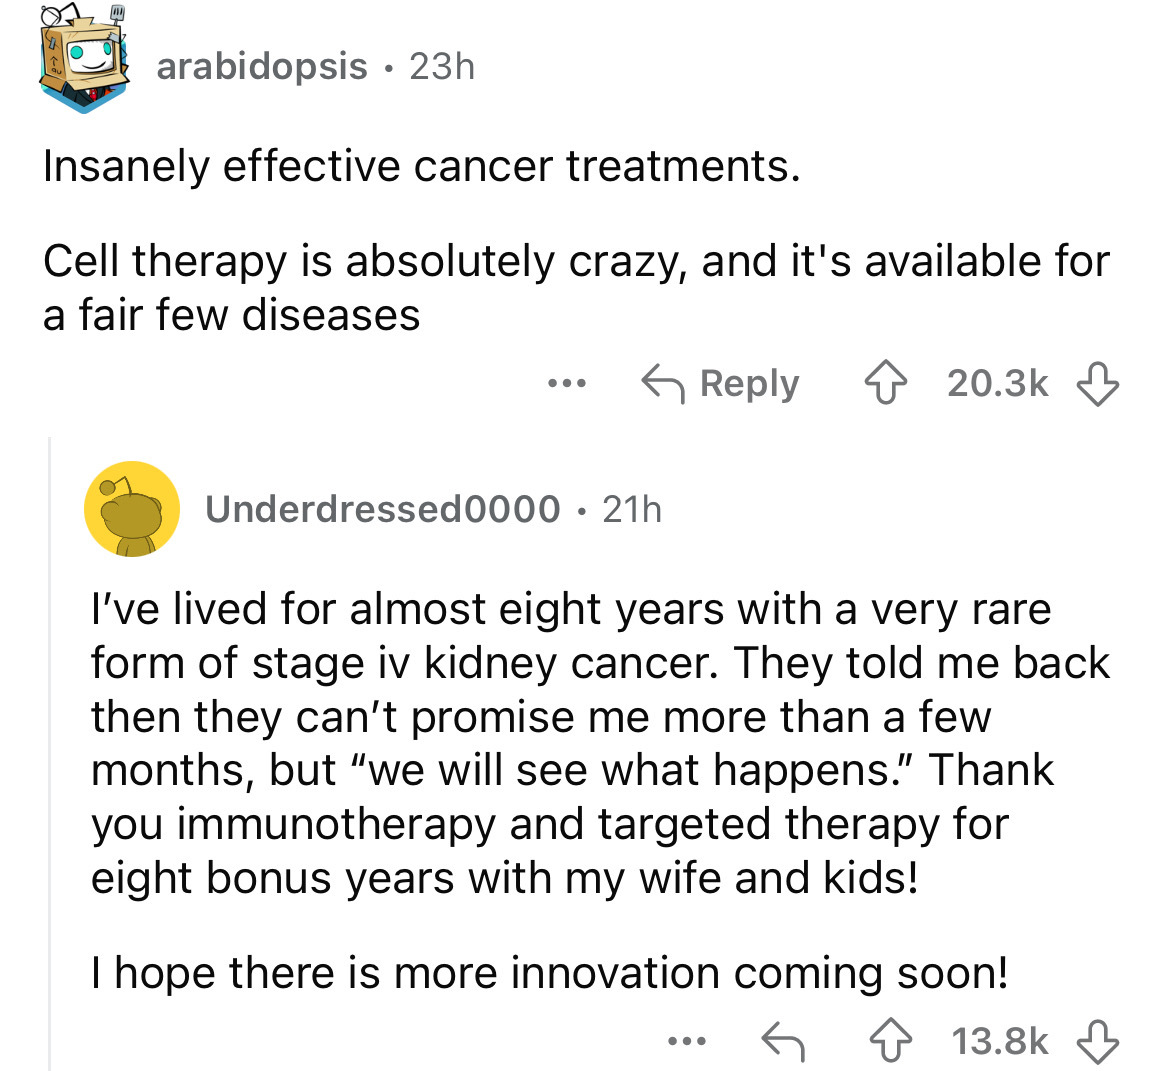 screenshot - arabidopsis 23h Insanely effective cancer treatments. Cell therapy is absolutely crazy, and it's available for a fair few diseases Underdressed0000 21h . I've lived for almost eight years with a very rare form of stage iv kidney cancer. They 